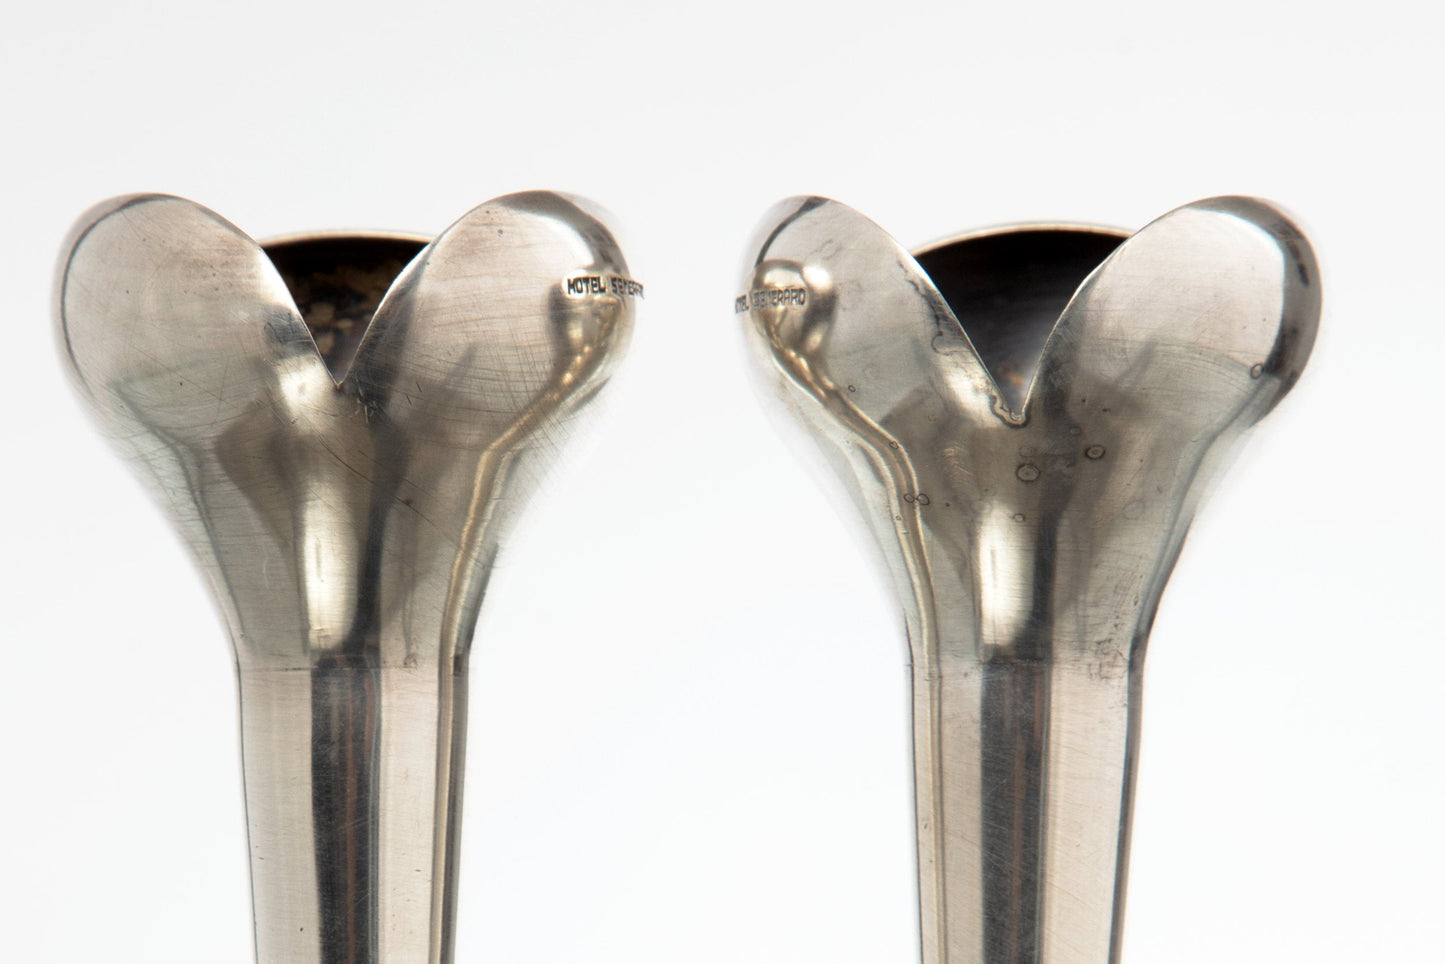 Pair of soliflore vases from the late 1960s by Gio Ponti for Fratelli Calderoni